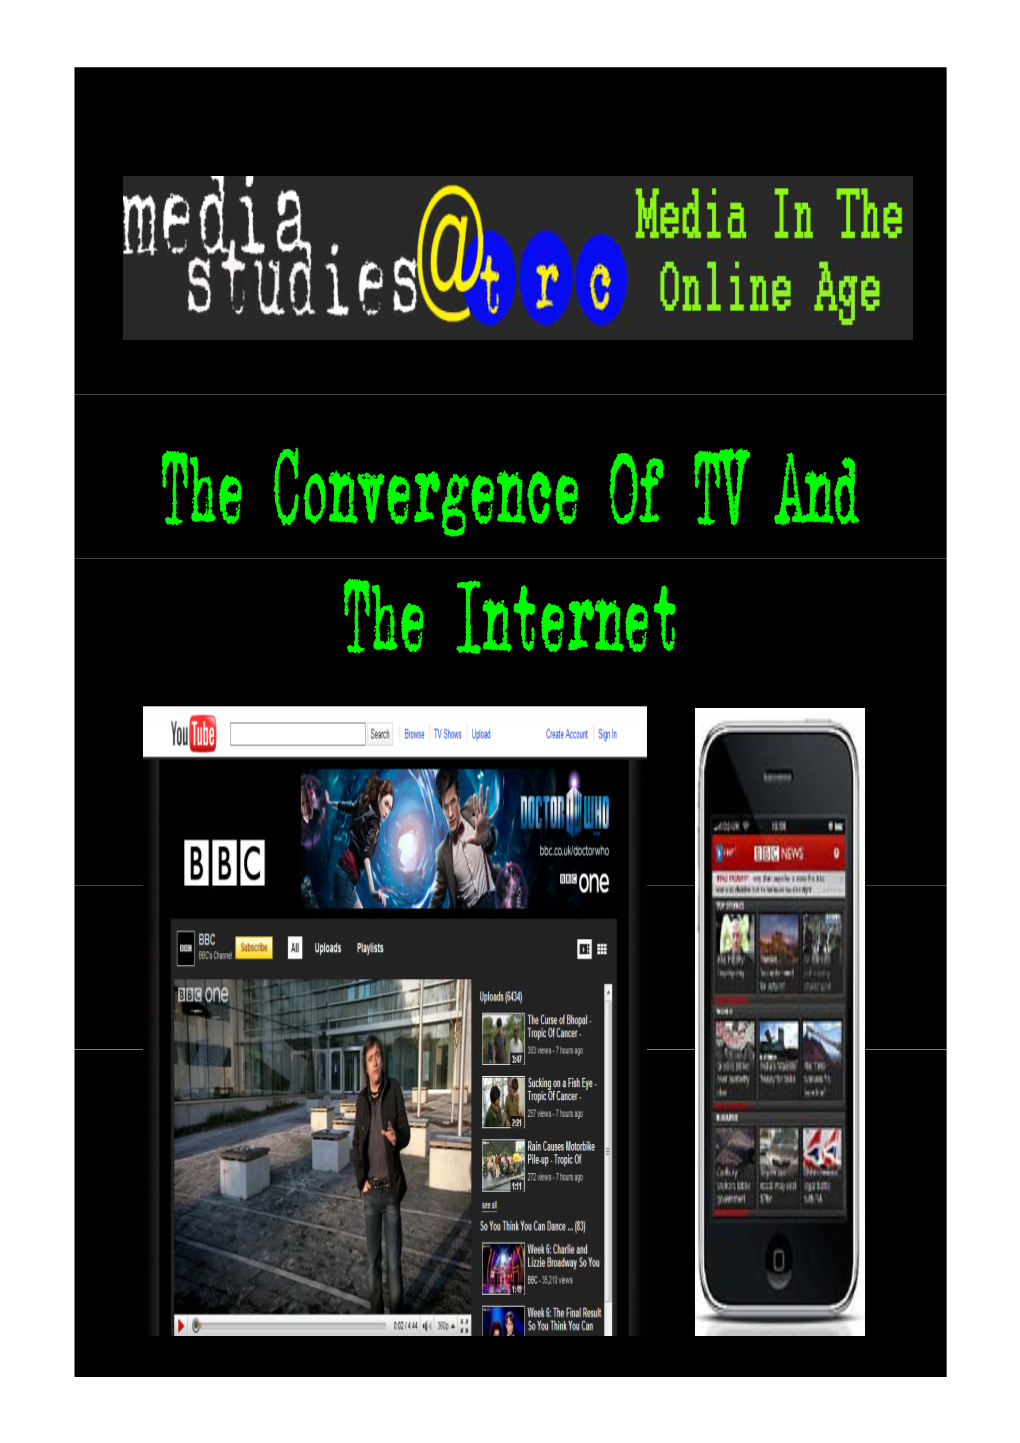 The Convergence of TV and the Internet